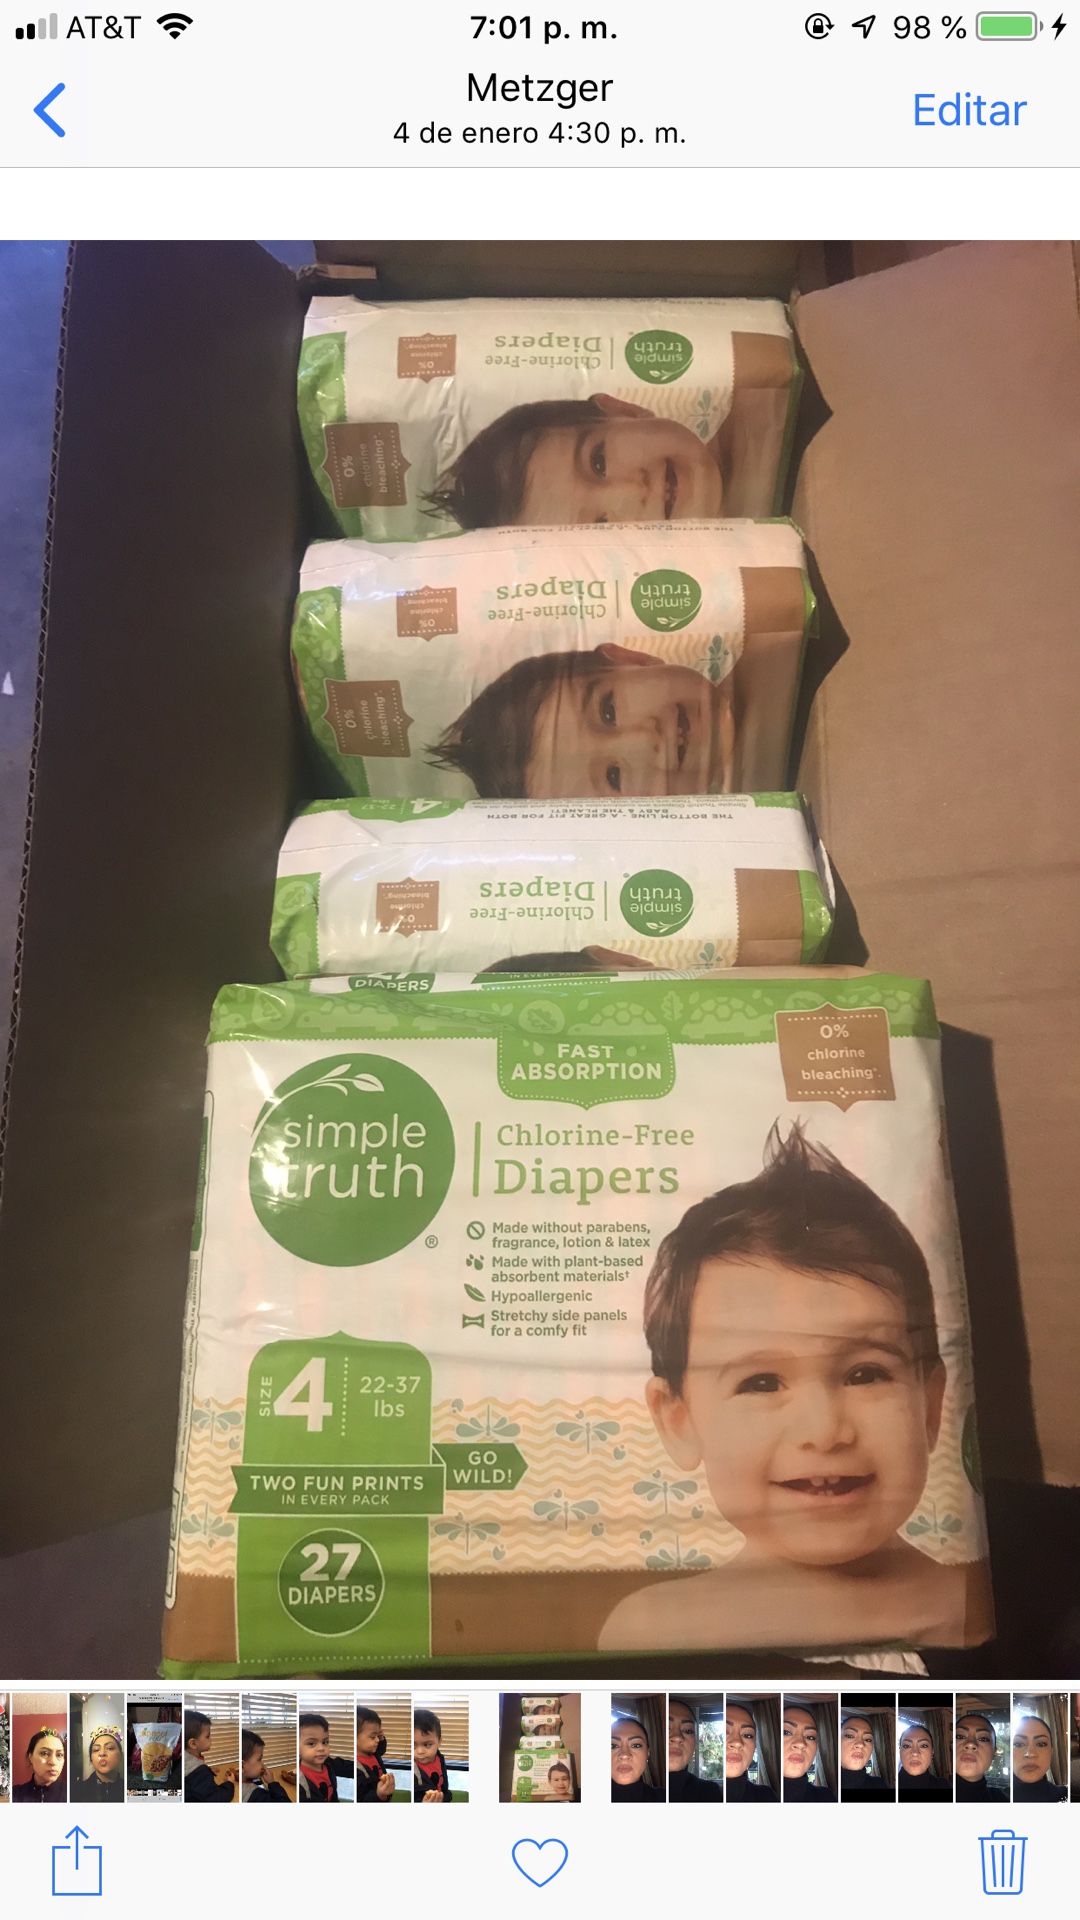 Pampers $6.00 for pk is organic